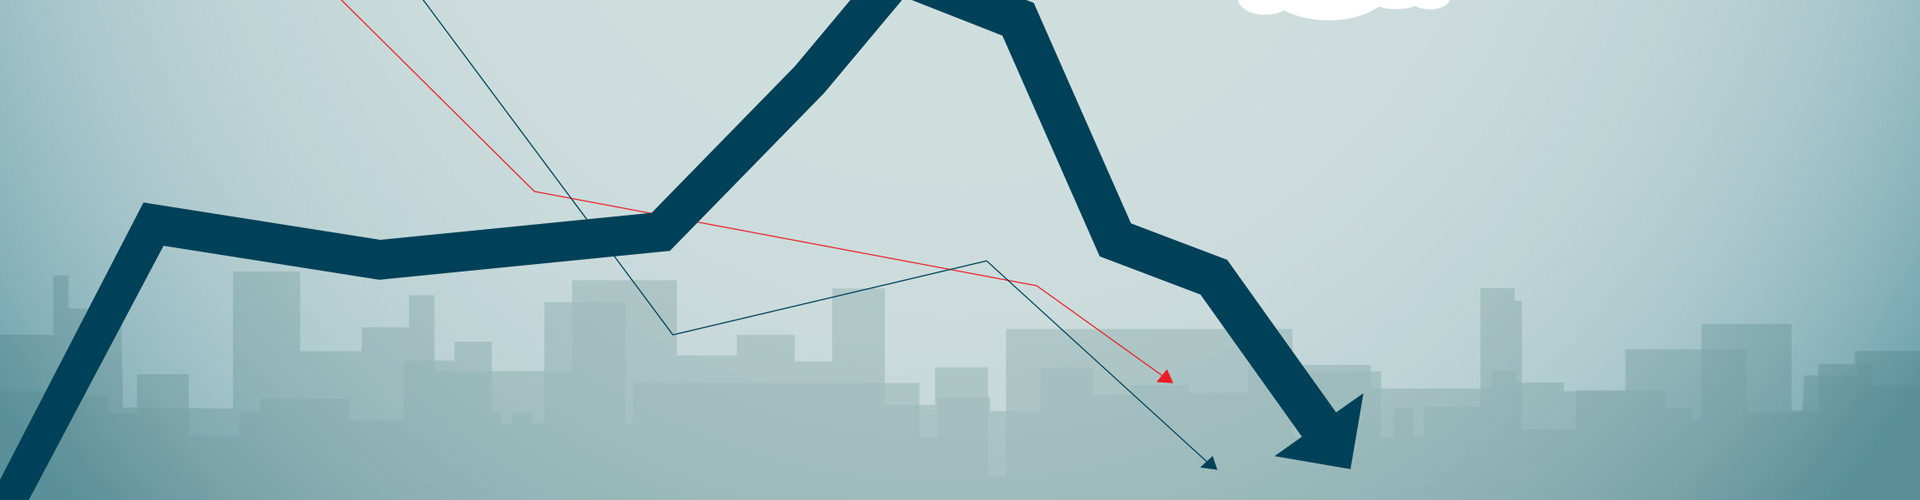 4 Ways to Get Ahead of the Real Financial Crisis blog banner featuring vector illustration of city skyline, a downwards chart arrow and man floating down with a red umbrella